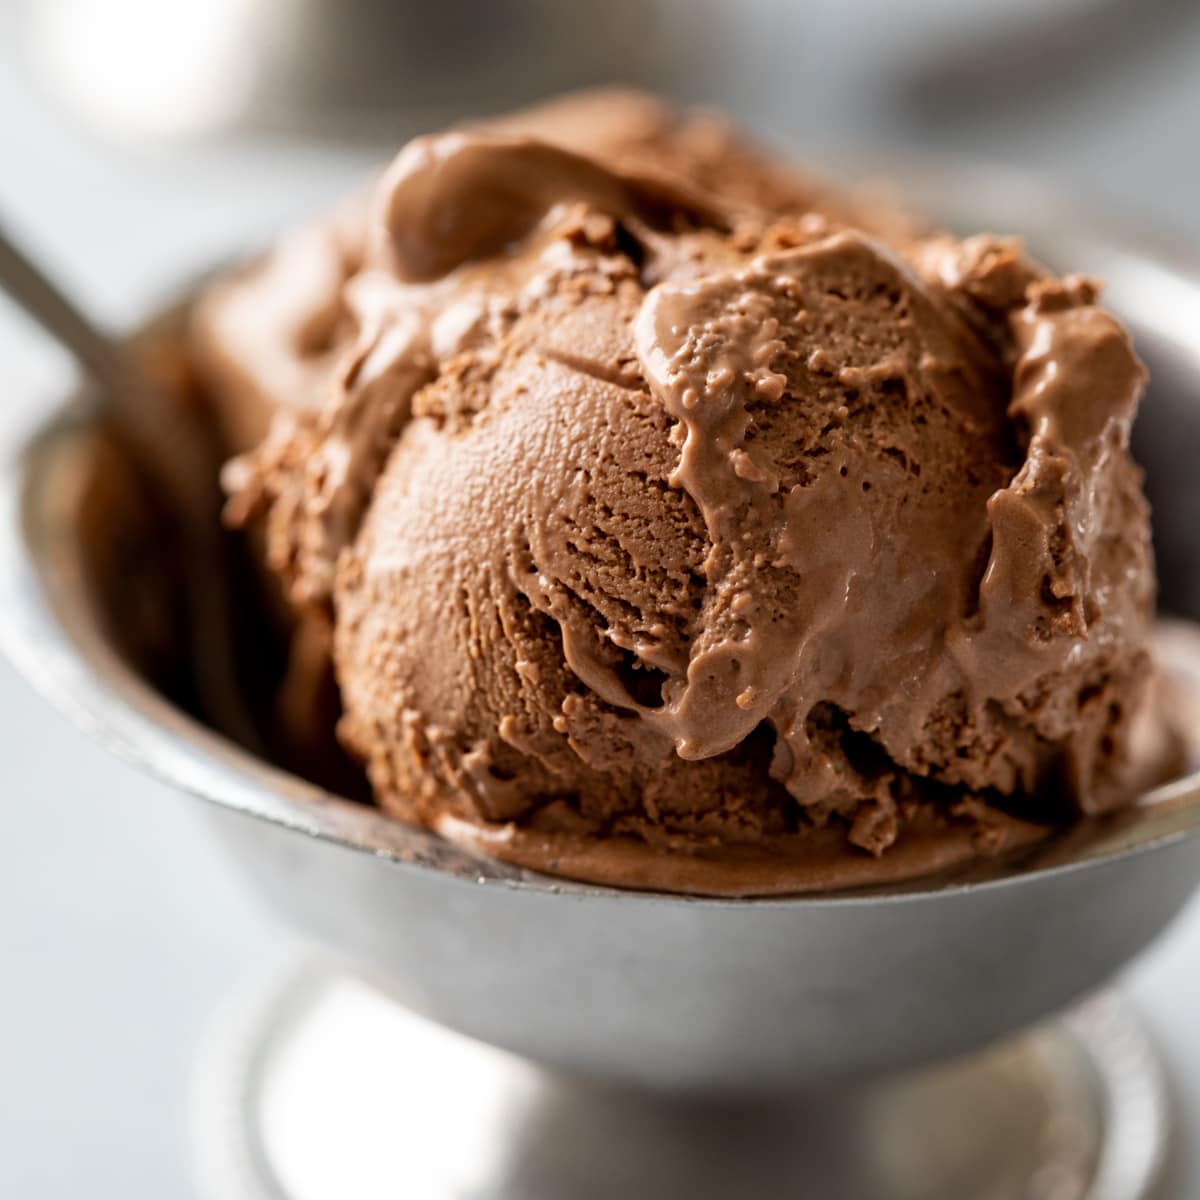 Chocolate Chickpea Ice Cream (No Nuts or Coconut)